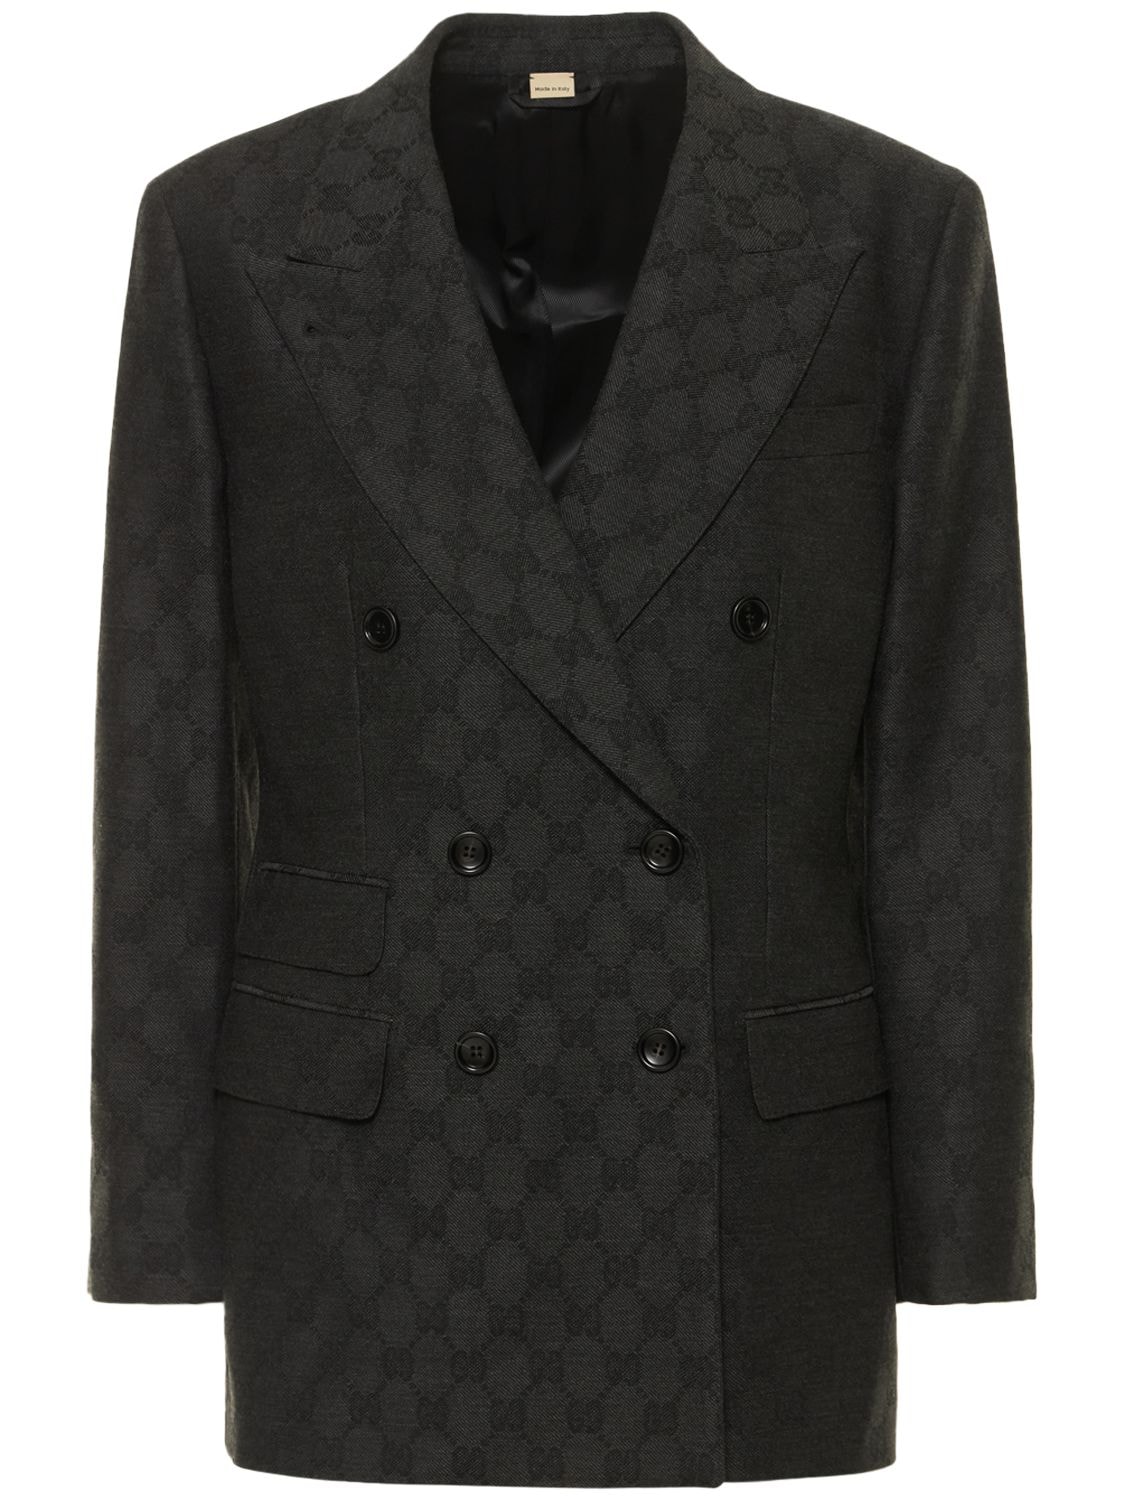 Gucci, Jackets & Coats, Auth Gucci Jacquard Gg Jean Jacket Brand New With  Tags Id67879xdbok